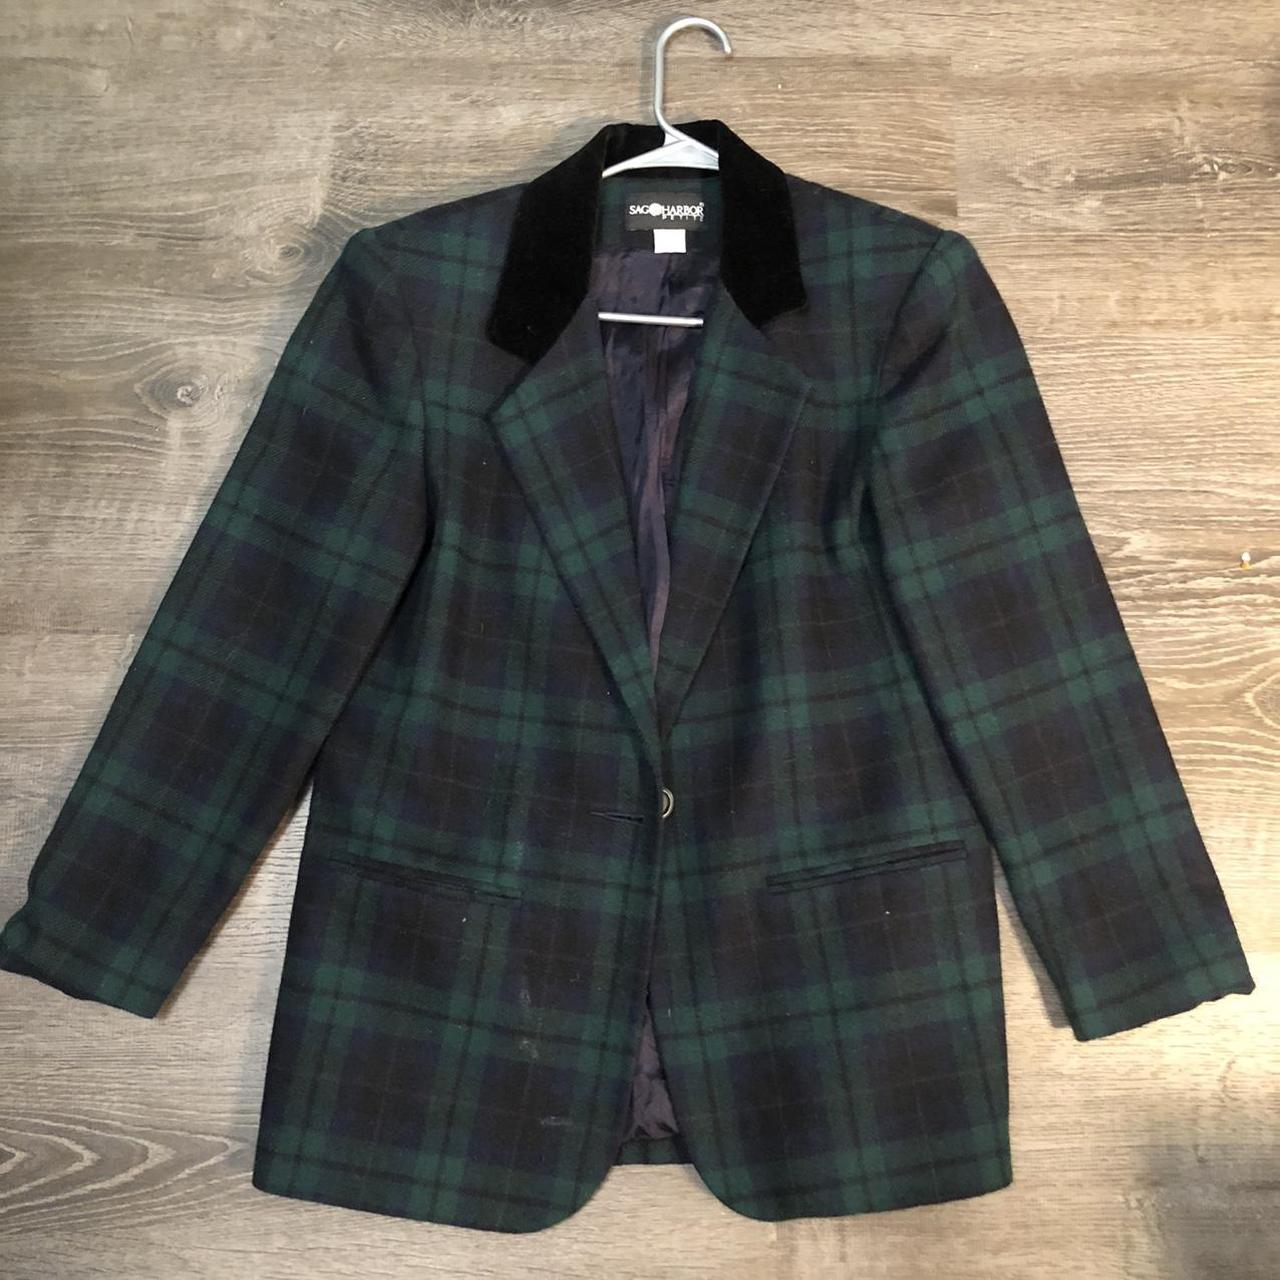 Sag Harbor Women's Green and Navy Tailored-jackets